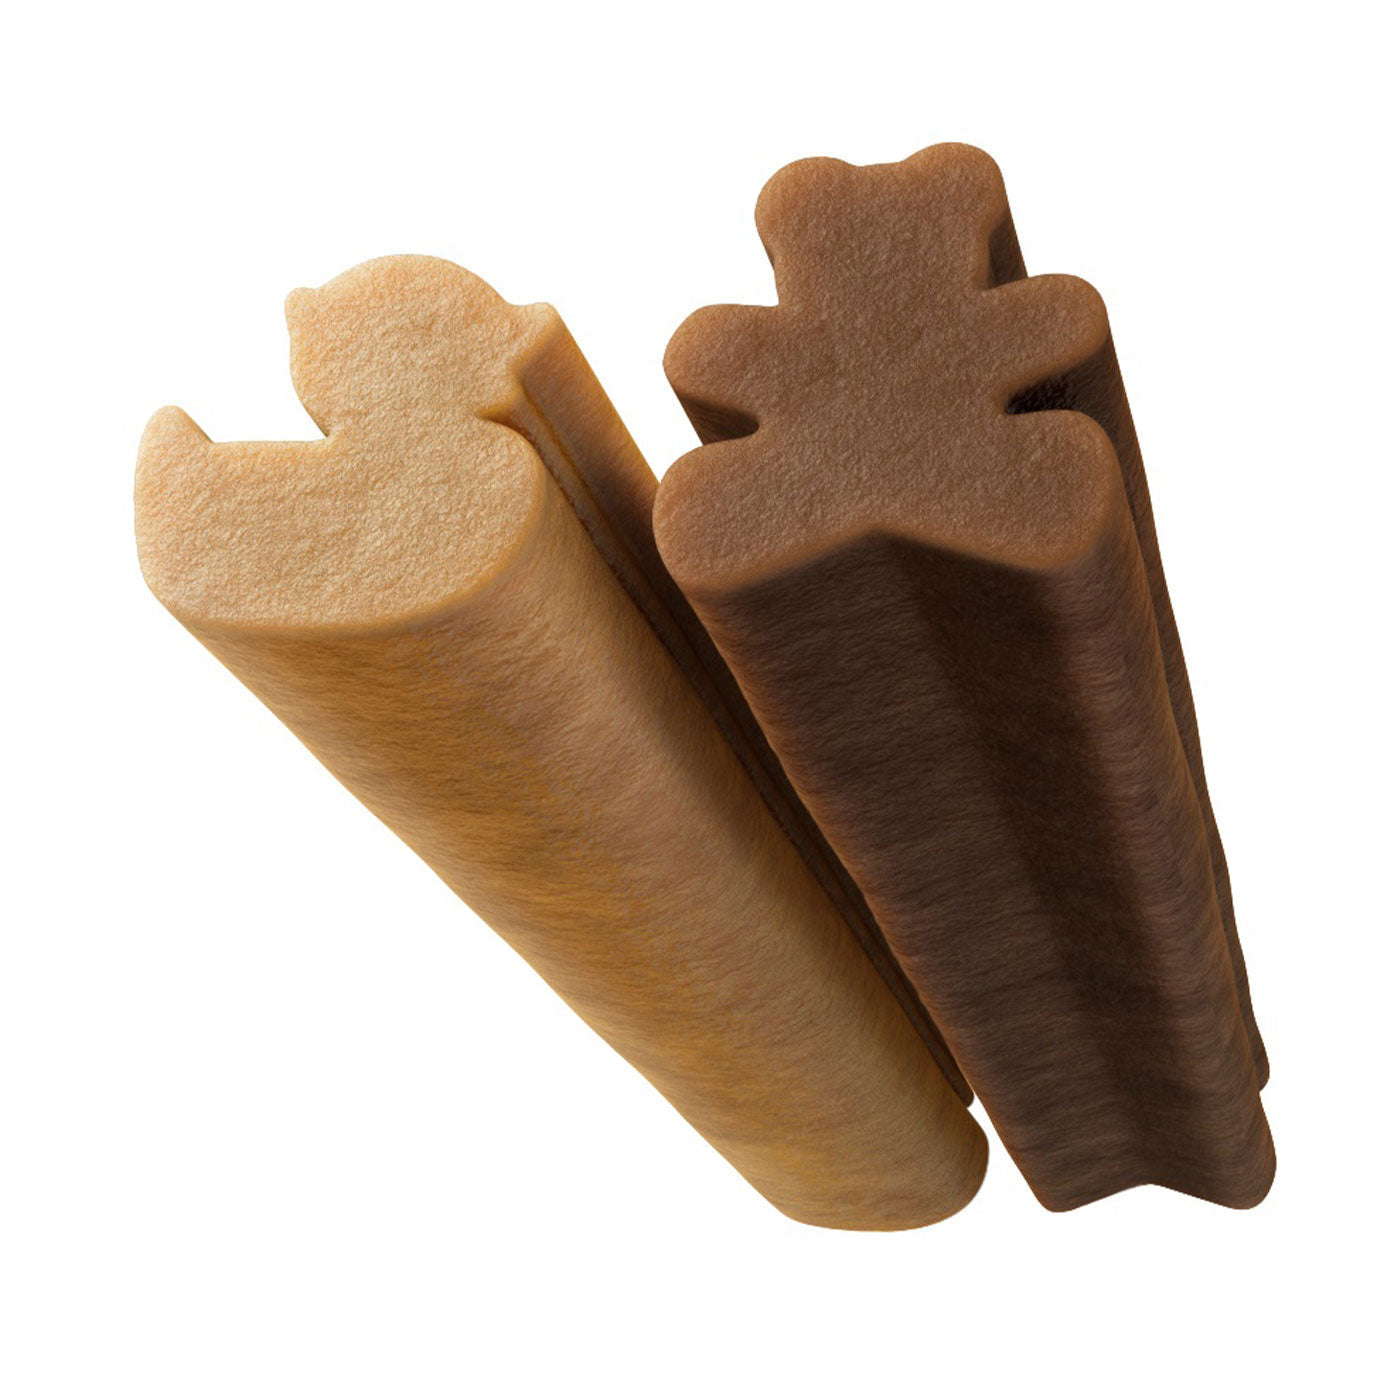 Whimzees Medium/Large Puppy Daily Dental Chews